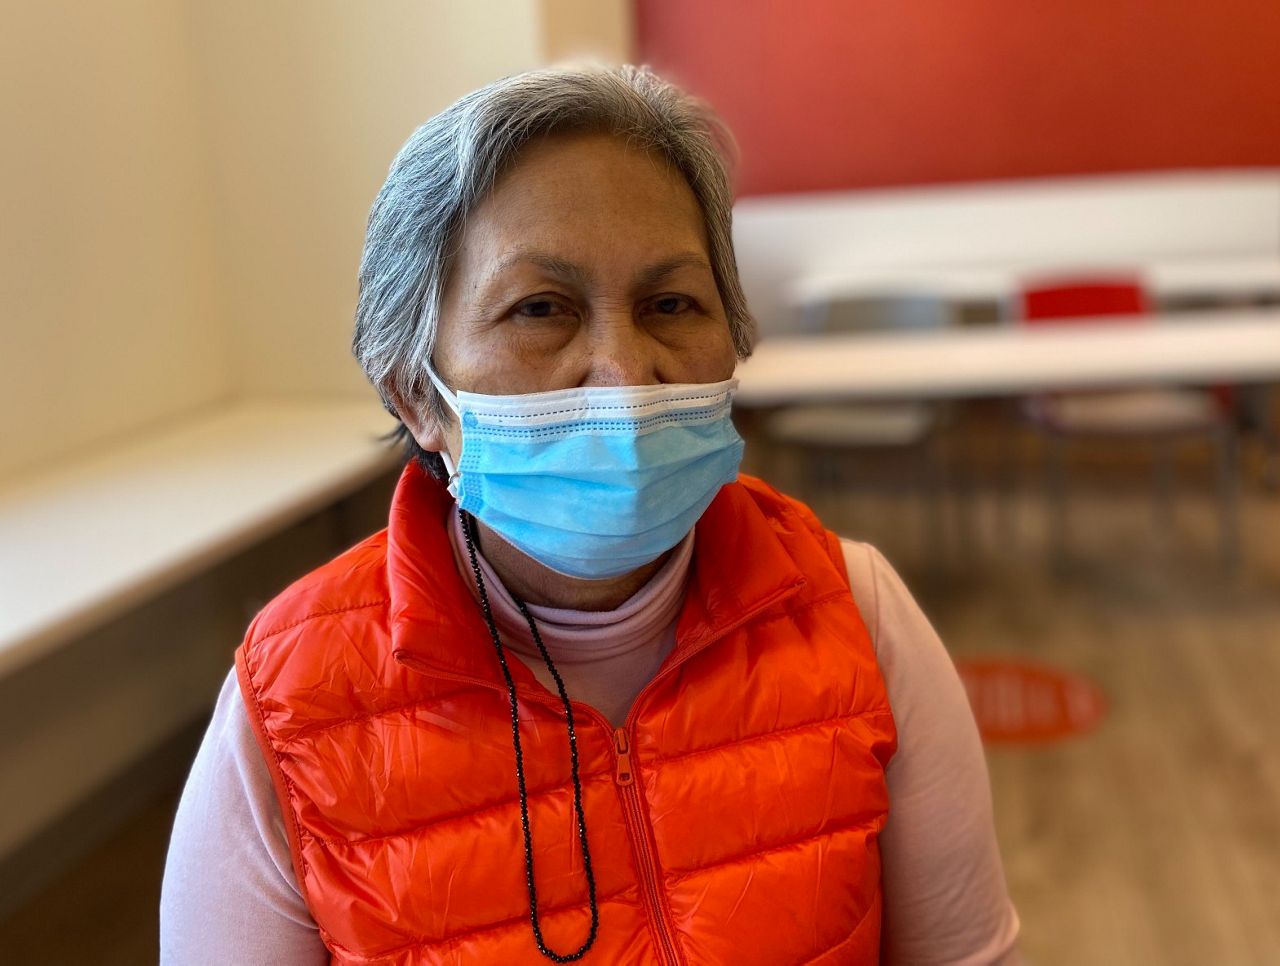 Portrait-style photo of Elvie Roman, sitting in a red puffer vest and a blue surgical mask on.